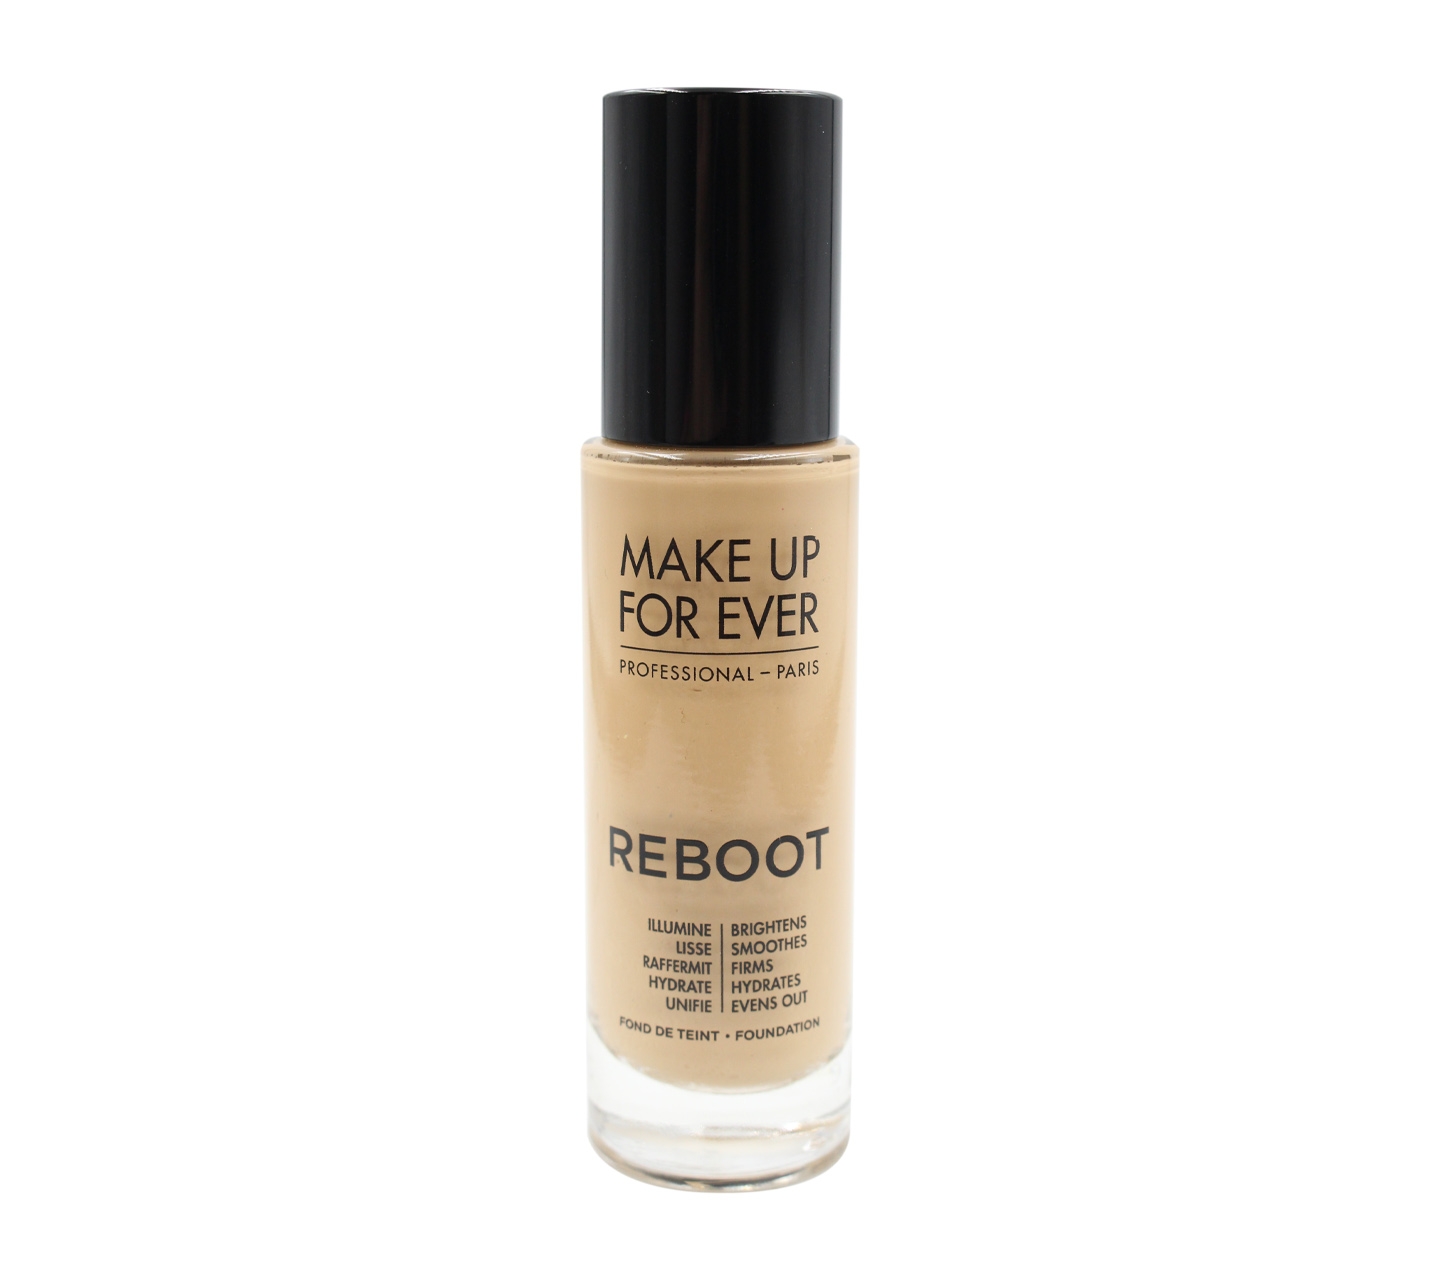 Make Up For Ever Reboot Illumine Lisse Refemit Hydrate Unifie Faundation Faces